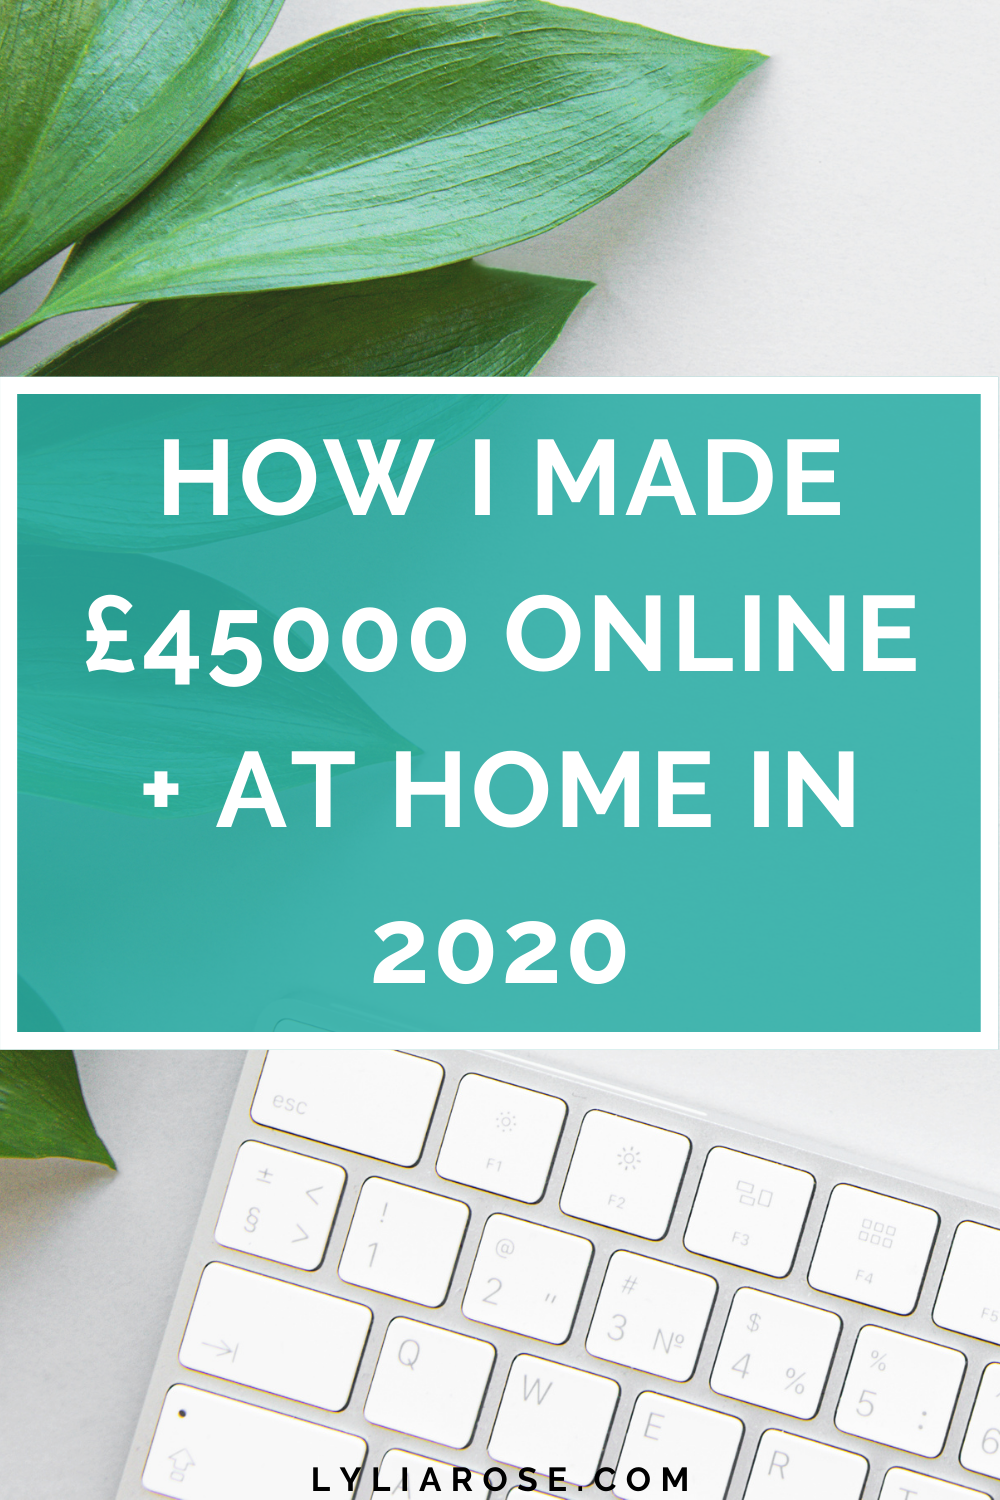 Annual income report how I made 45000 pounds online + at home in 2020